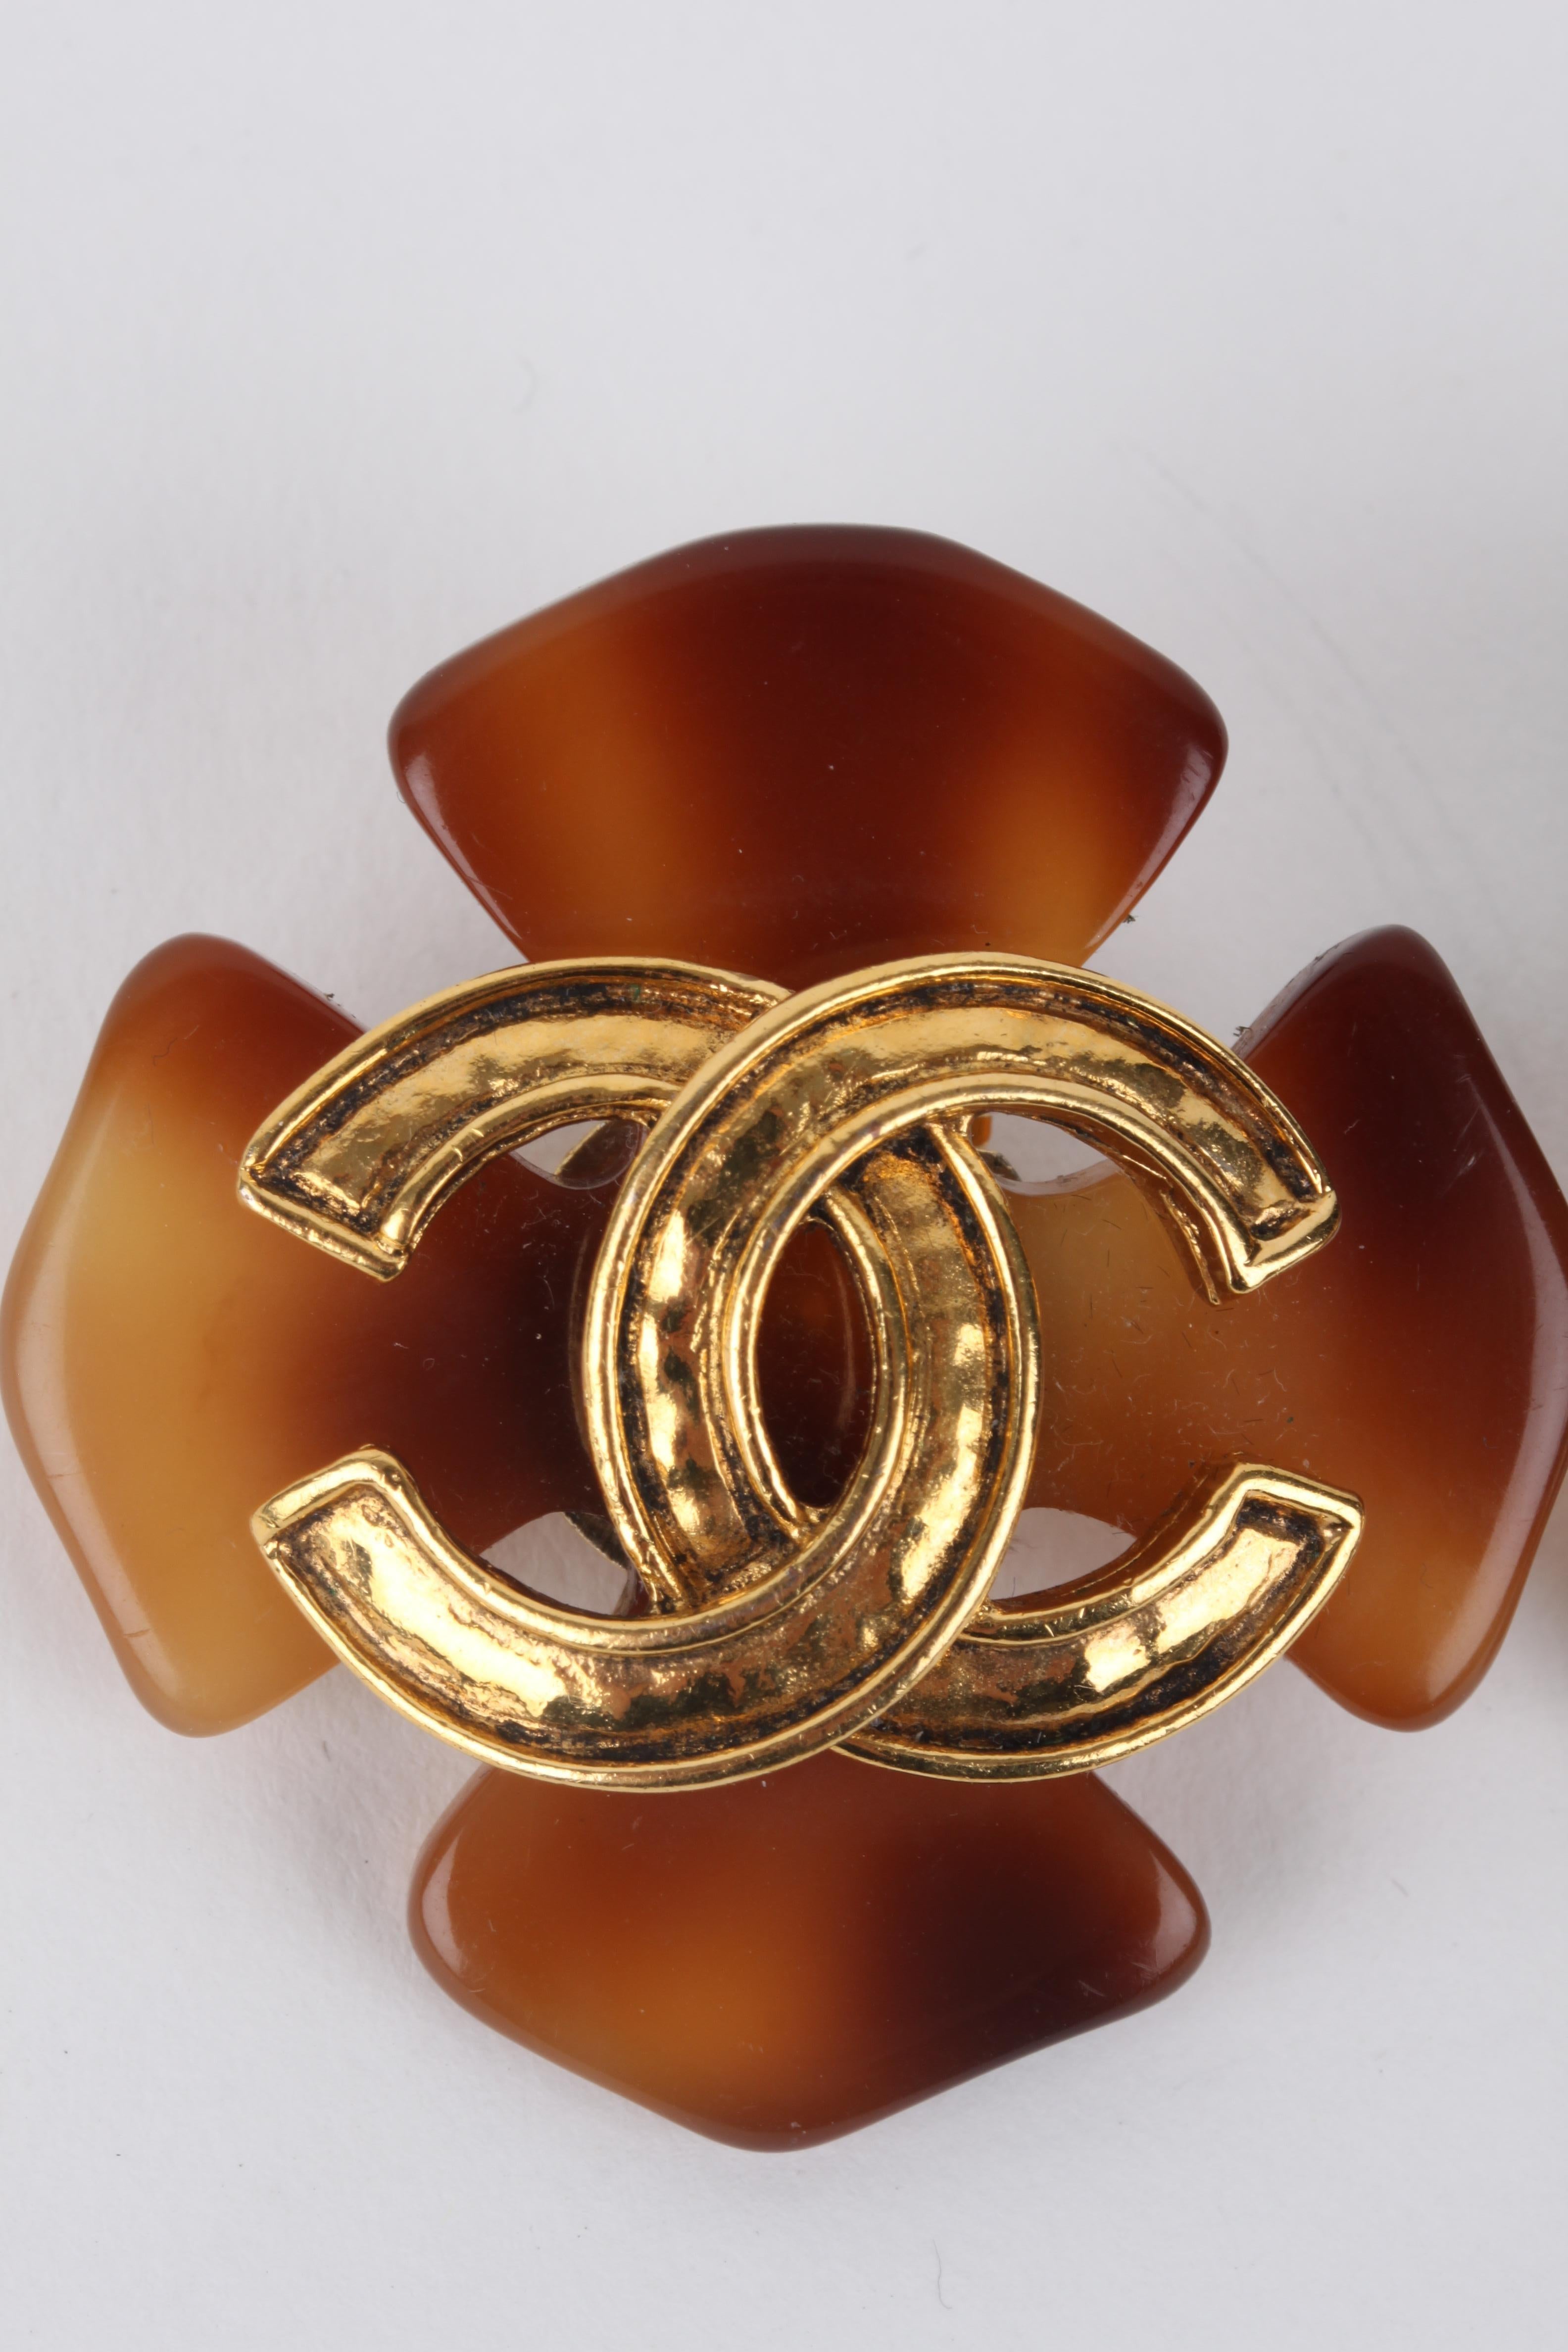 Chanel 1994 Spring/Summer (94P) Large Brown Faux Tortoise Gold Logo Clip-On Earrings .

These earrings feature a lux brown-coloured lucite tortoise shell exterior with a gold-plated CC-logo embellished finish. The earrings feature a gold-plated